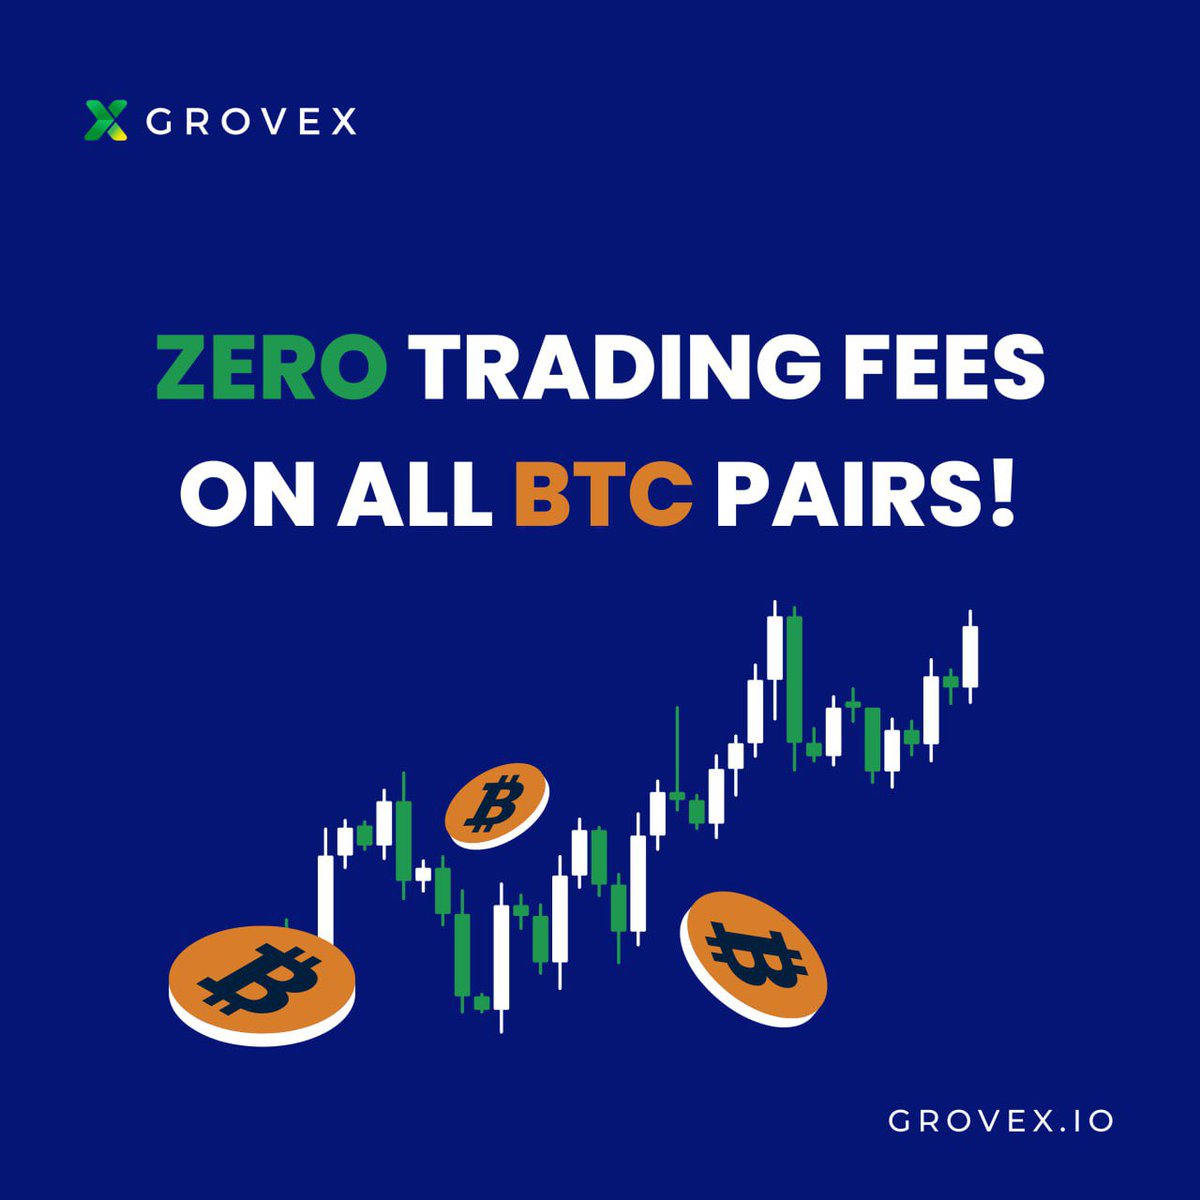 Enjoy 0 trading fees on all #Bitcoin pairs on #GroveX 

#Crypto #BNB #SOL #1000xGems #BSCgem